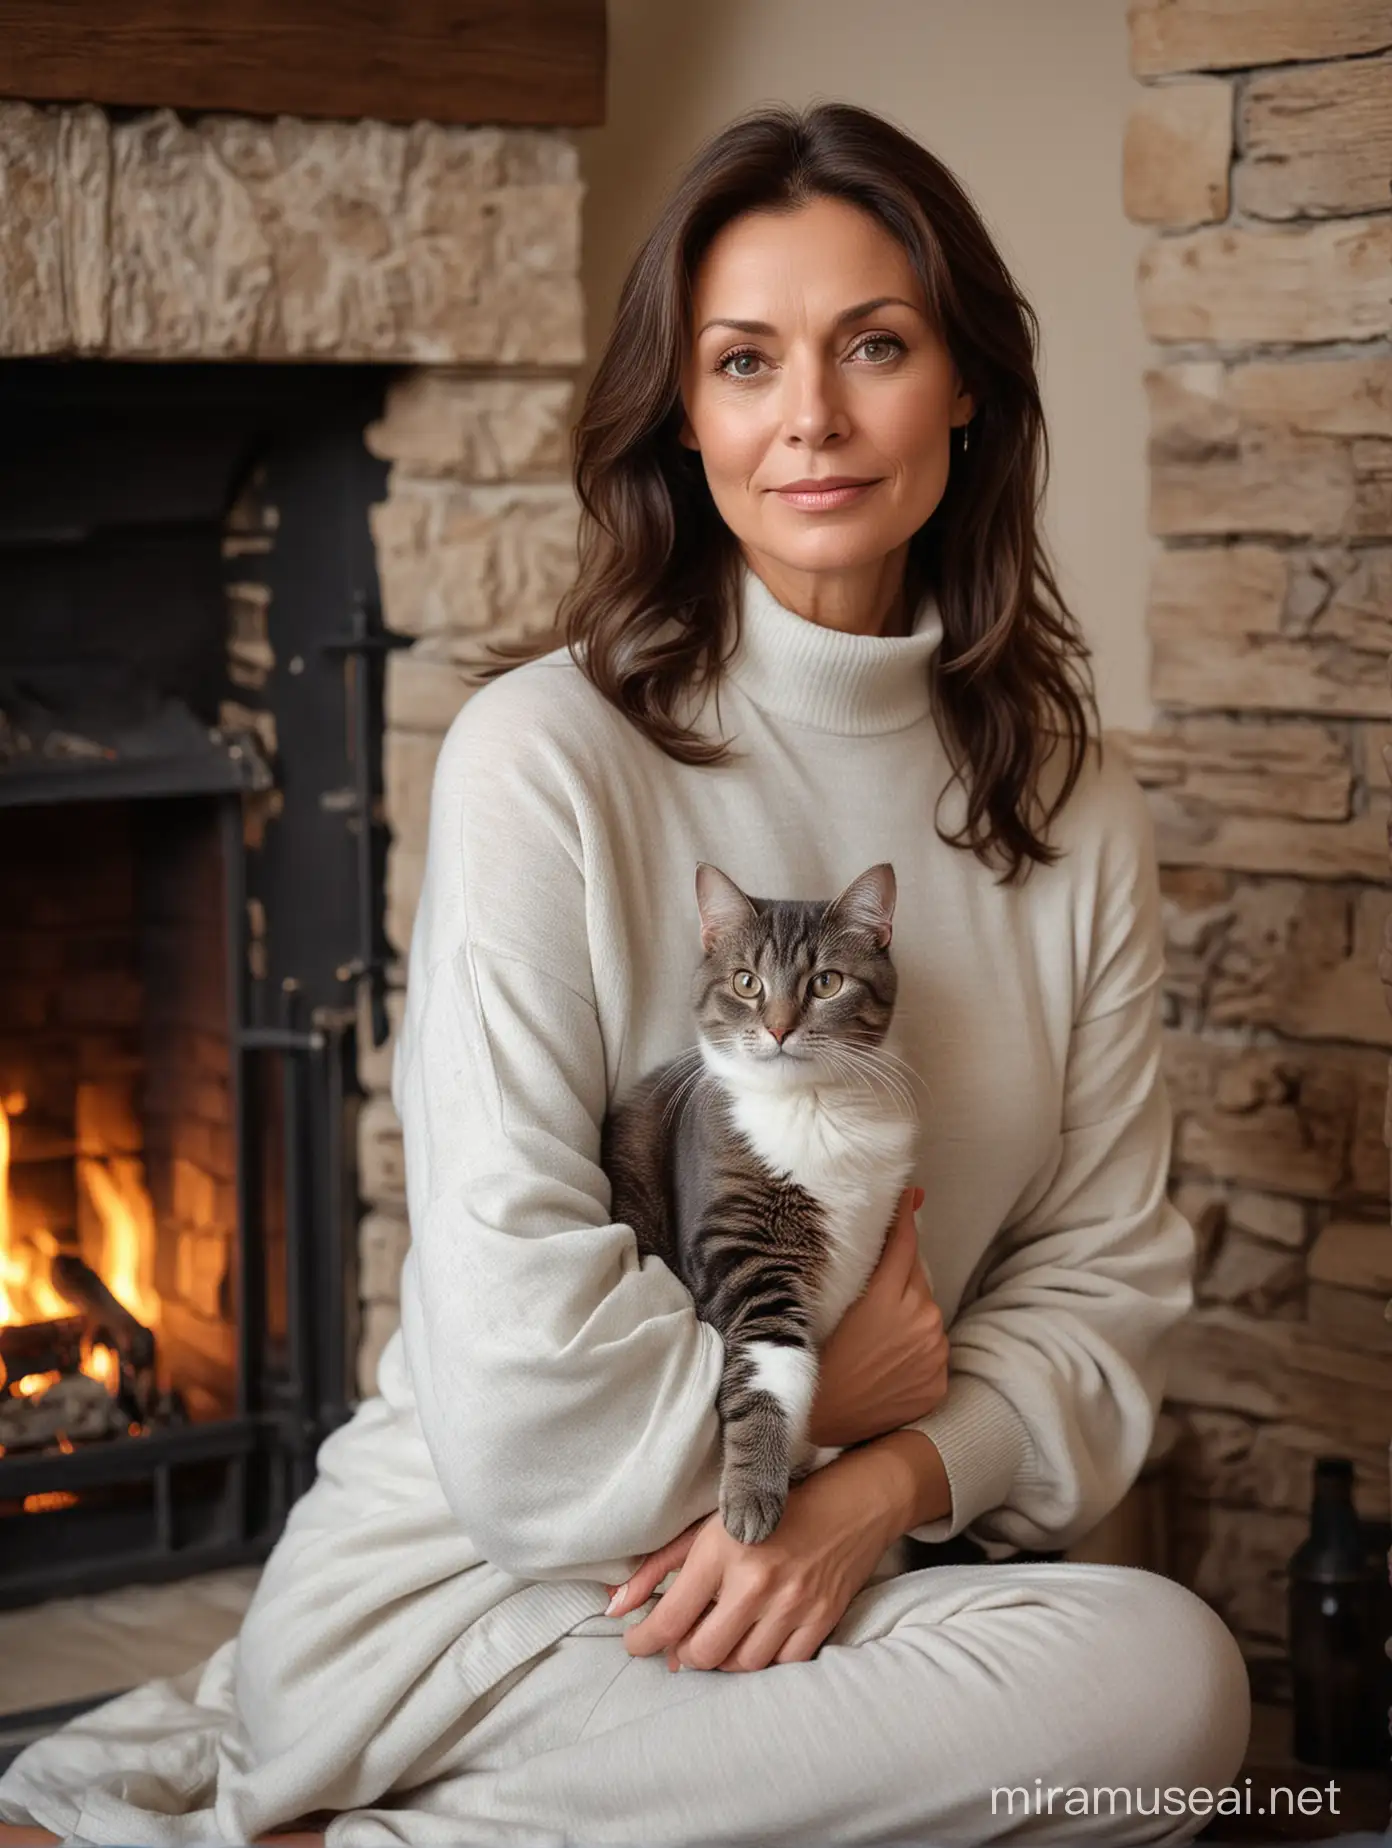 Elegant Mature Woman Sitting by Fireplace with Cat